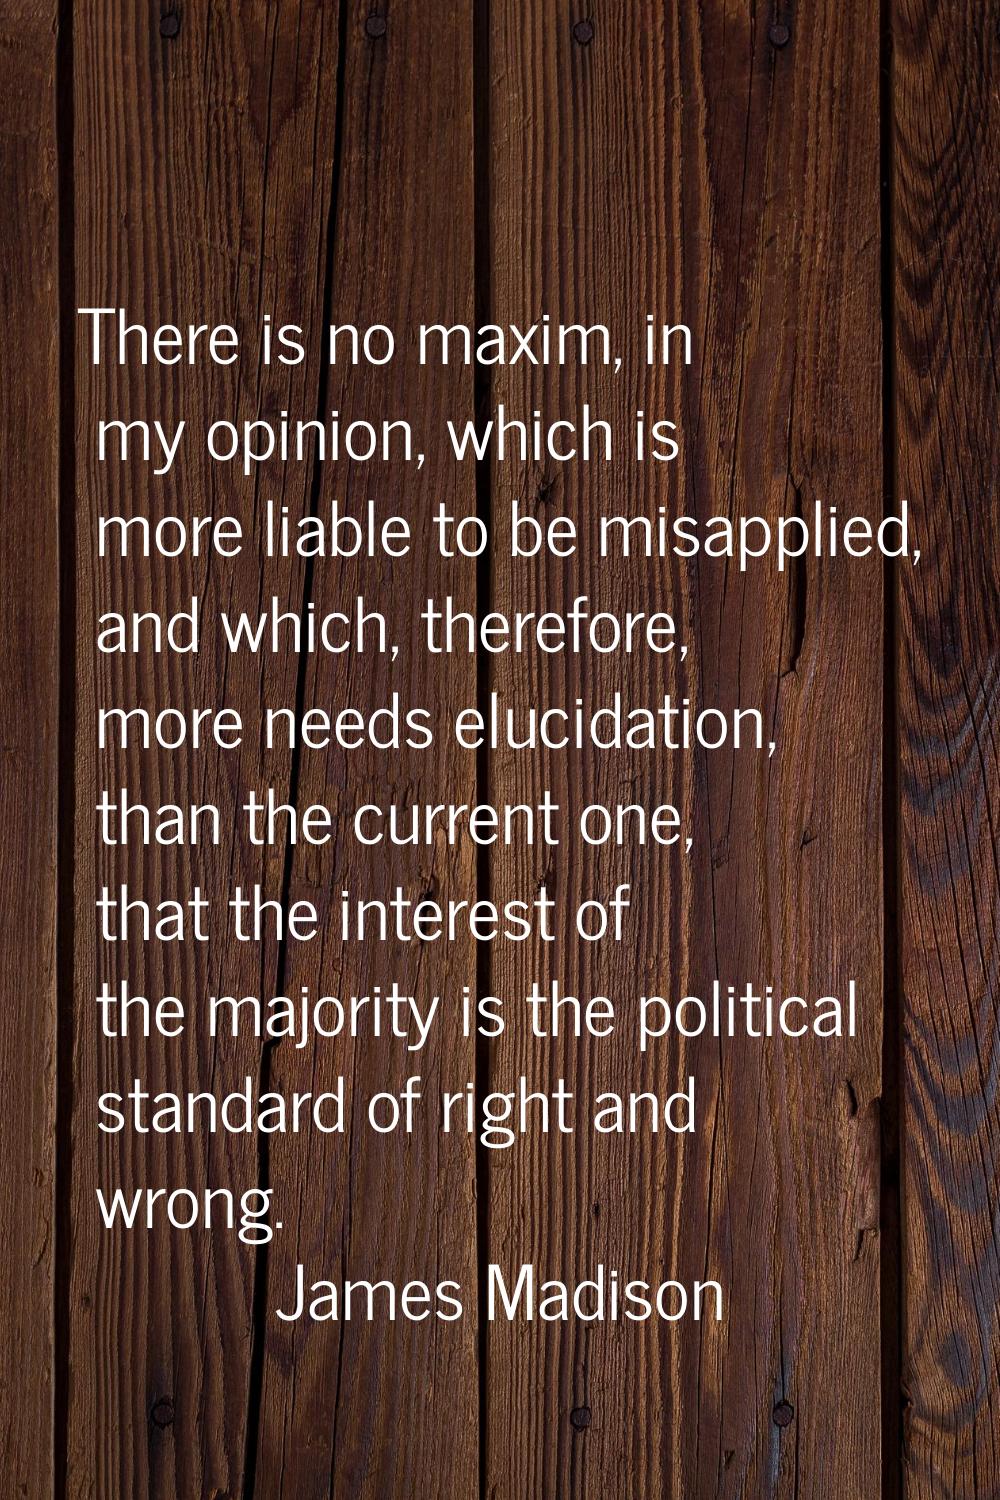 There is no maxim, in my opinion, which is more liable to be misapplied, and which, therefore, more